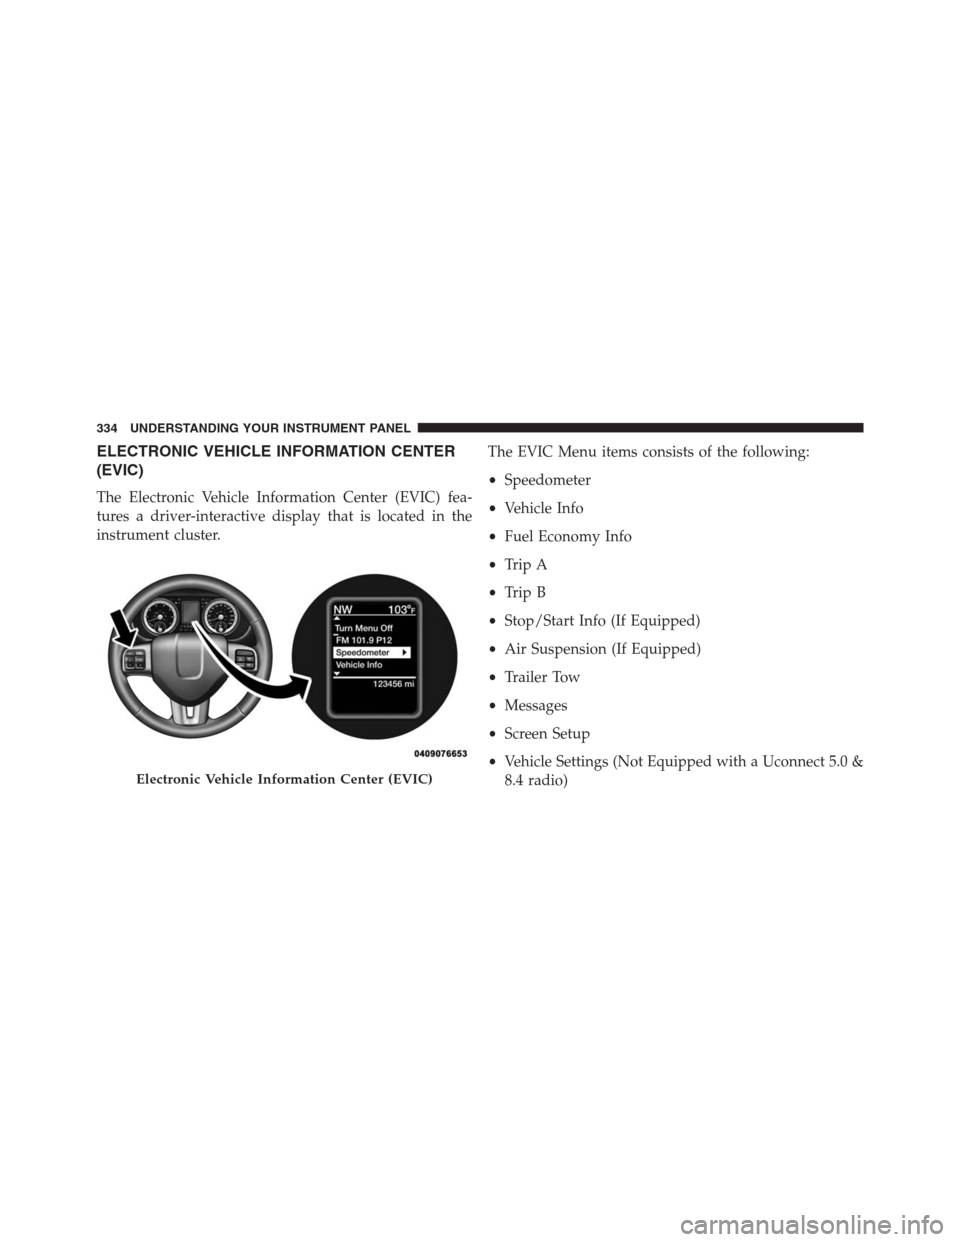 Ram 1500 2016  Owners Manual ELECTRONIC VEHICLE INFORMATION CENTER
(EVIC)
The Electronic Vehicle Information Center (EVIC) fea-
tures a driver-interactive display that is located in the
instrument cluster.The EVIC Menu items cons